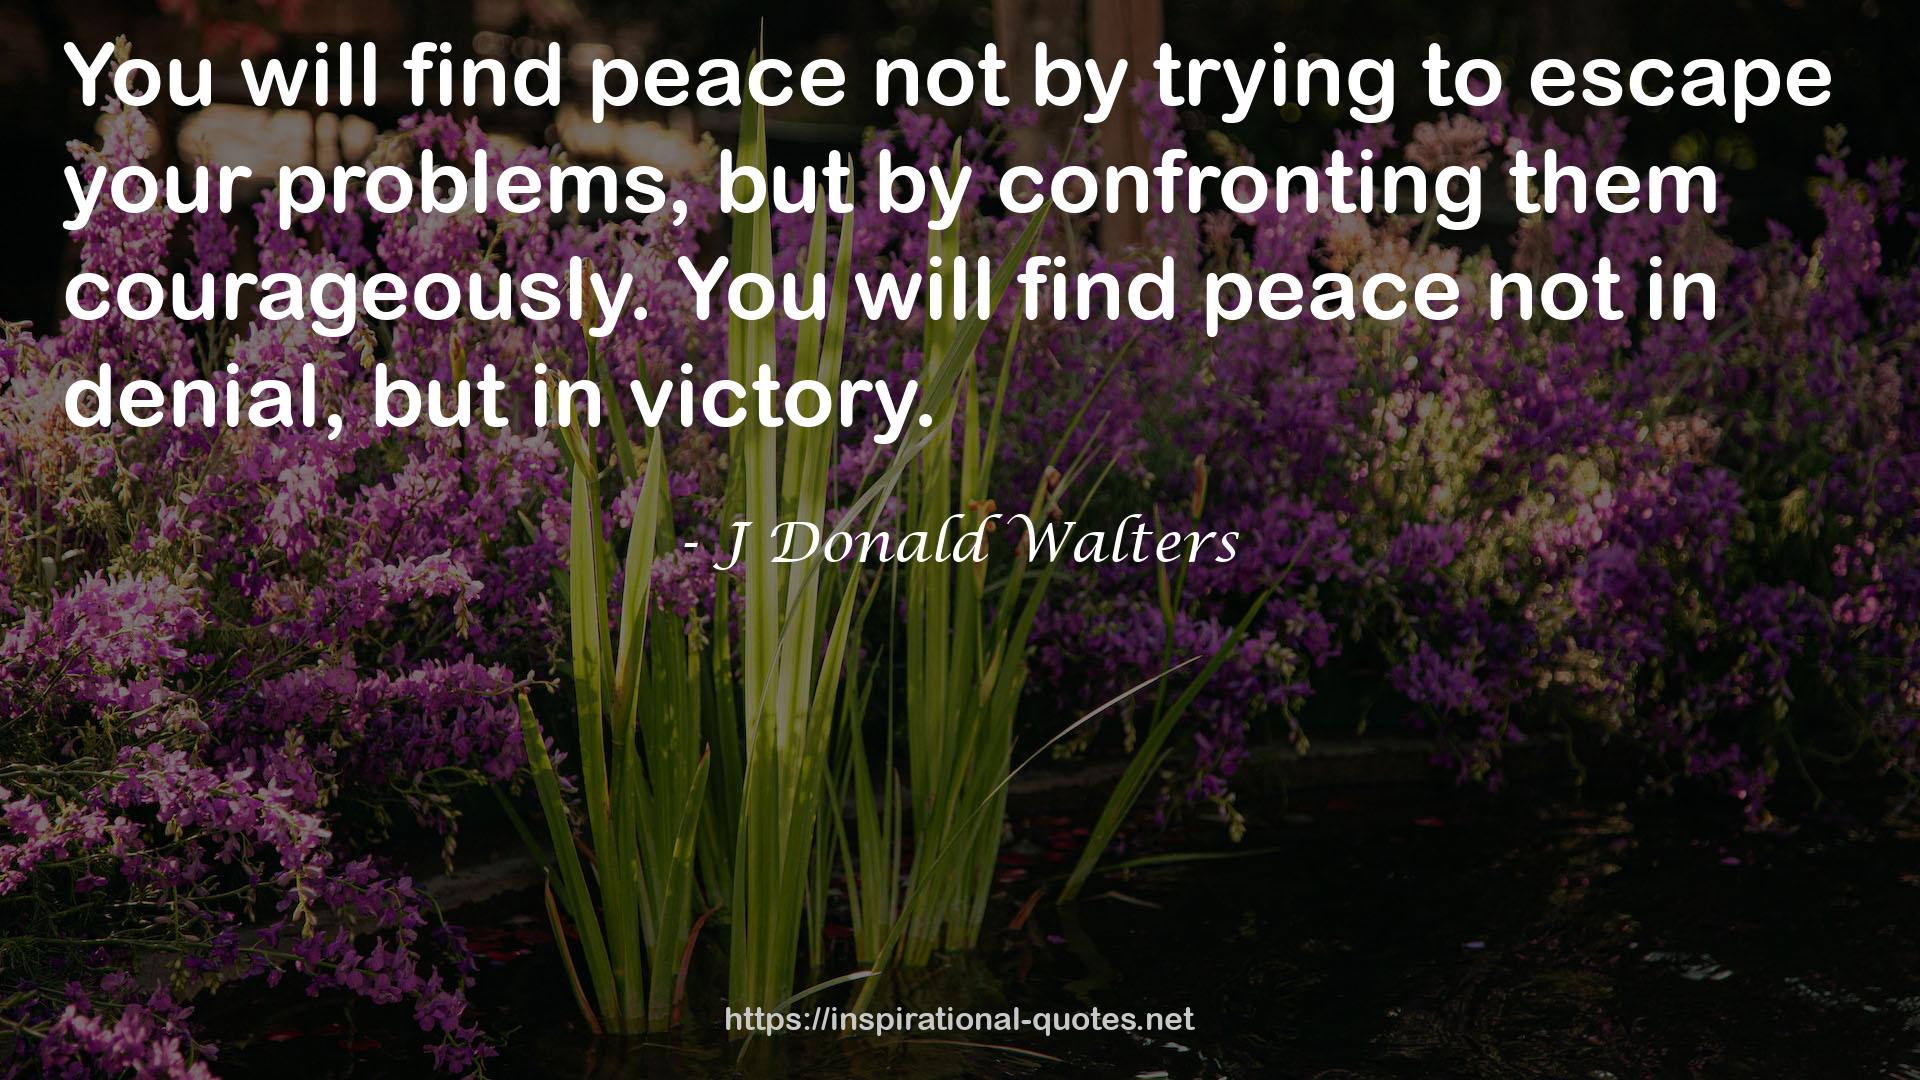 J Donald Walters QUOTES